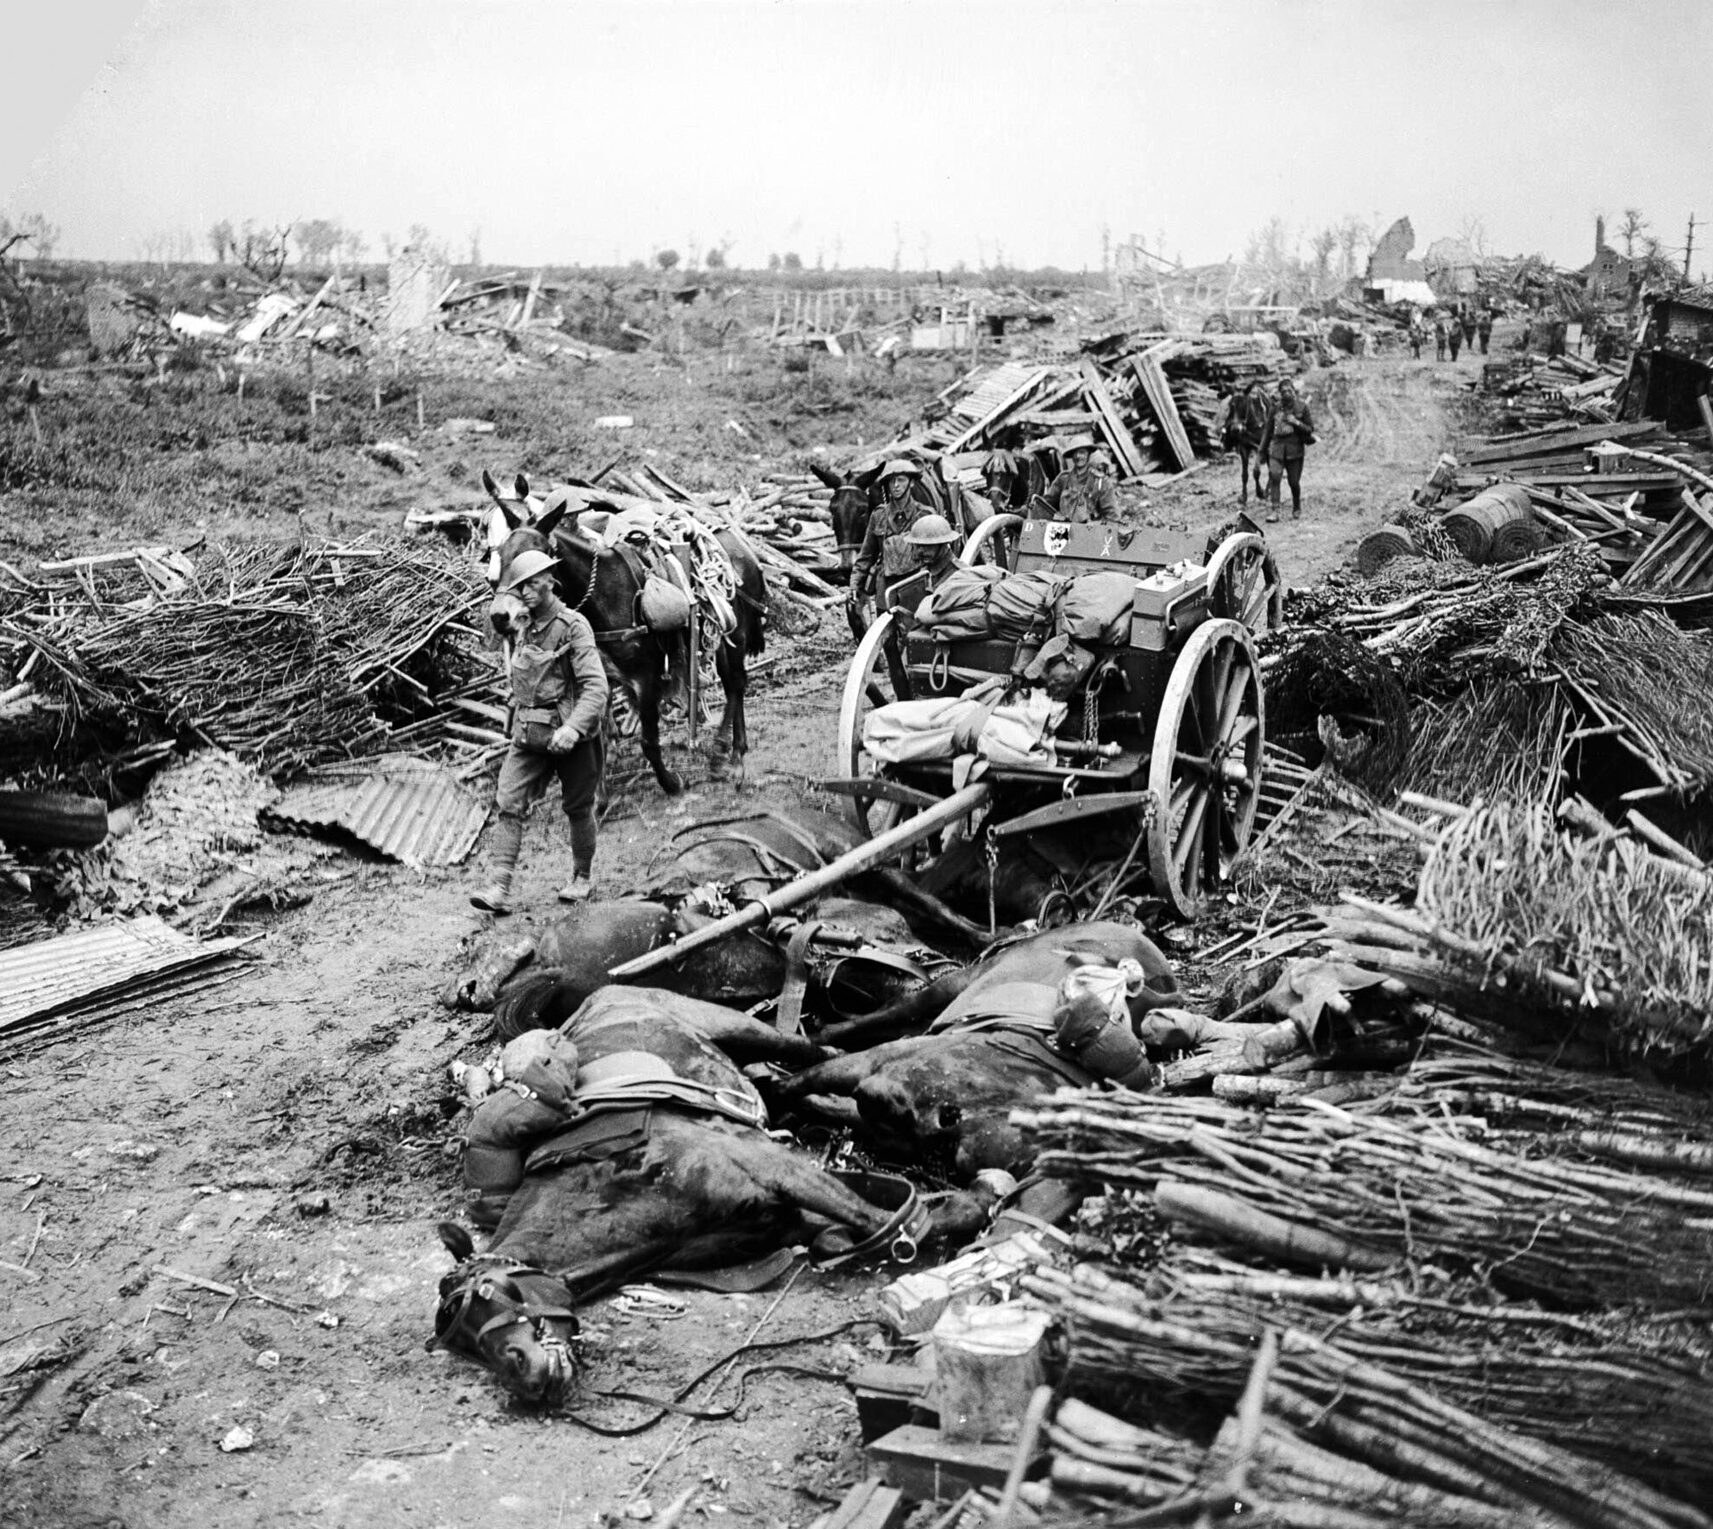 While the British painstakingly brought supplies by pack trains to the front lines in late July, their artillery fired upwards of four million shells to soften the German positions for the infantry attack. 